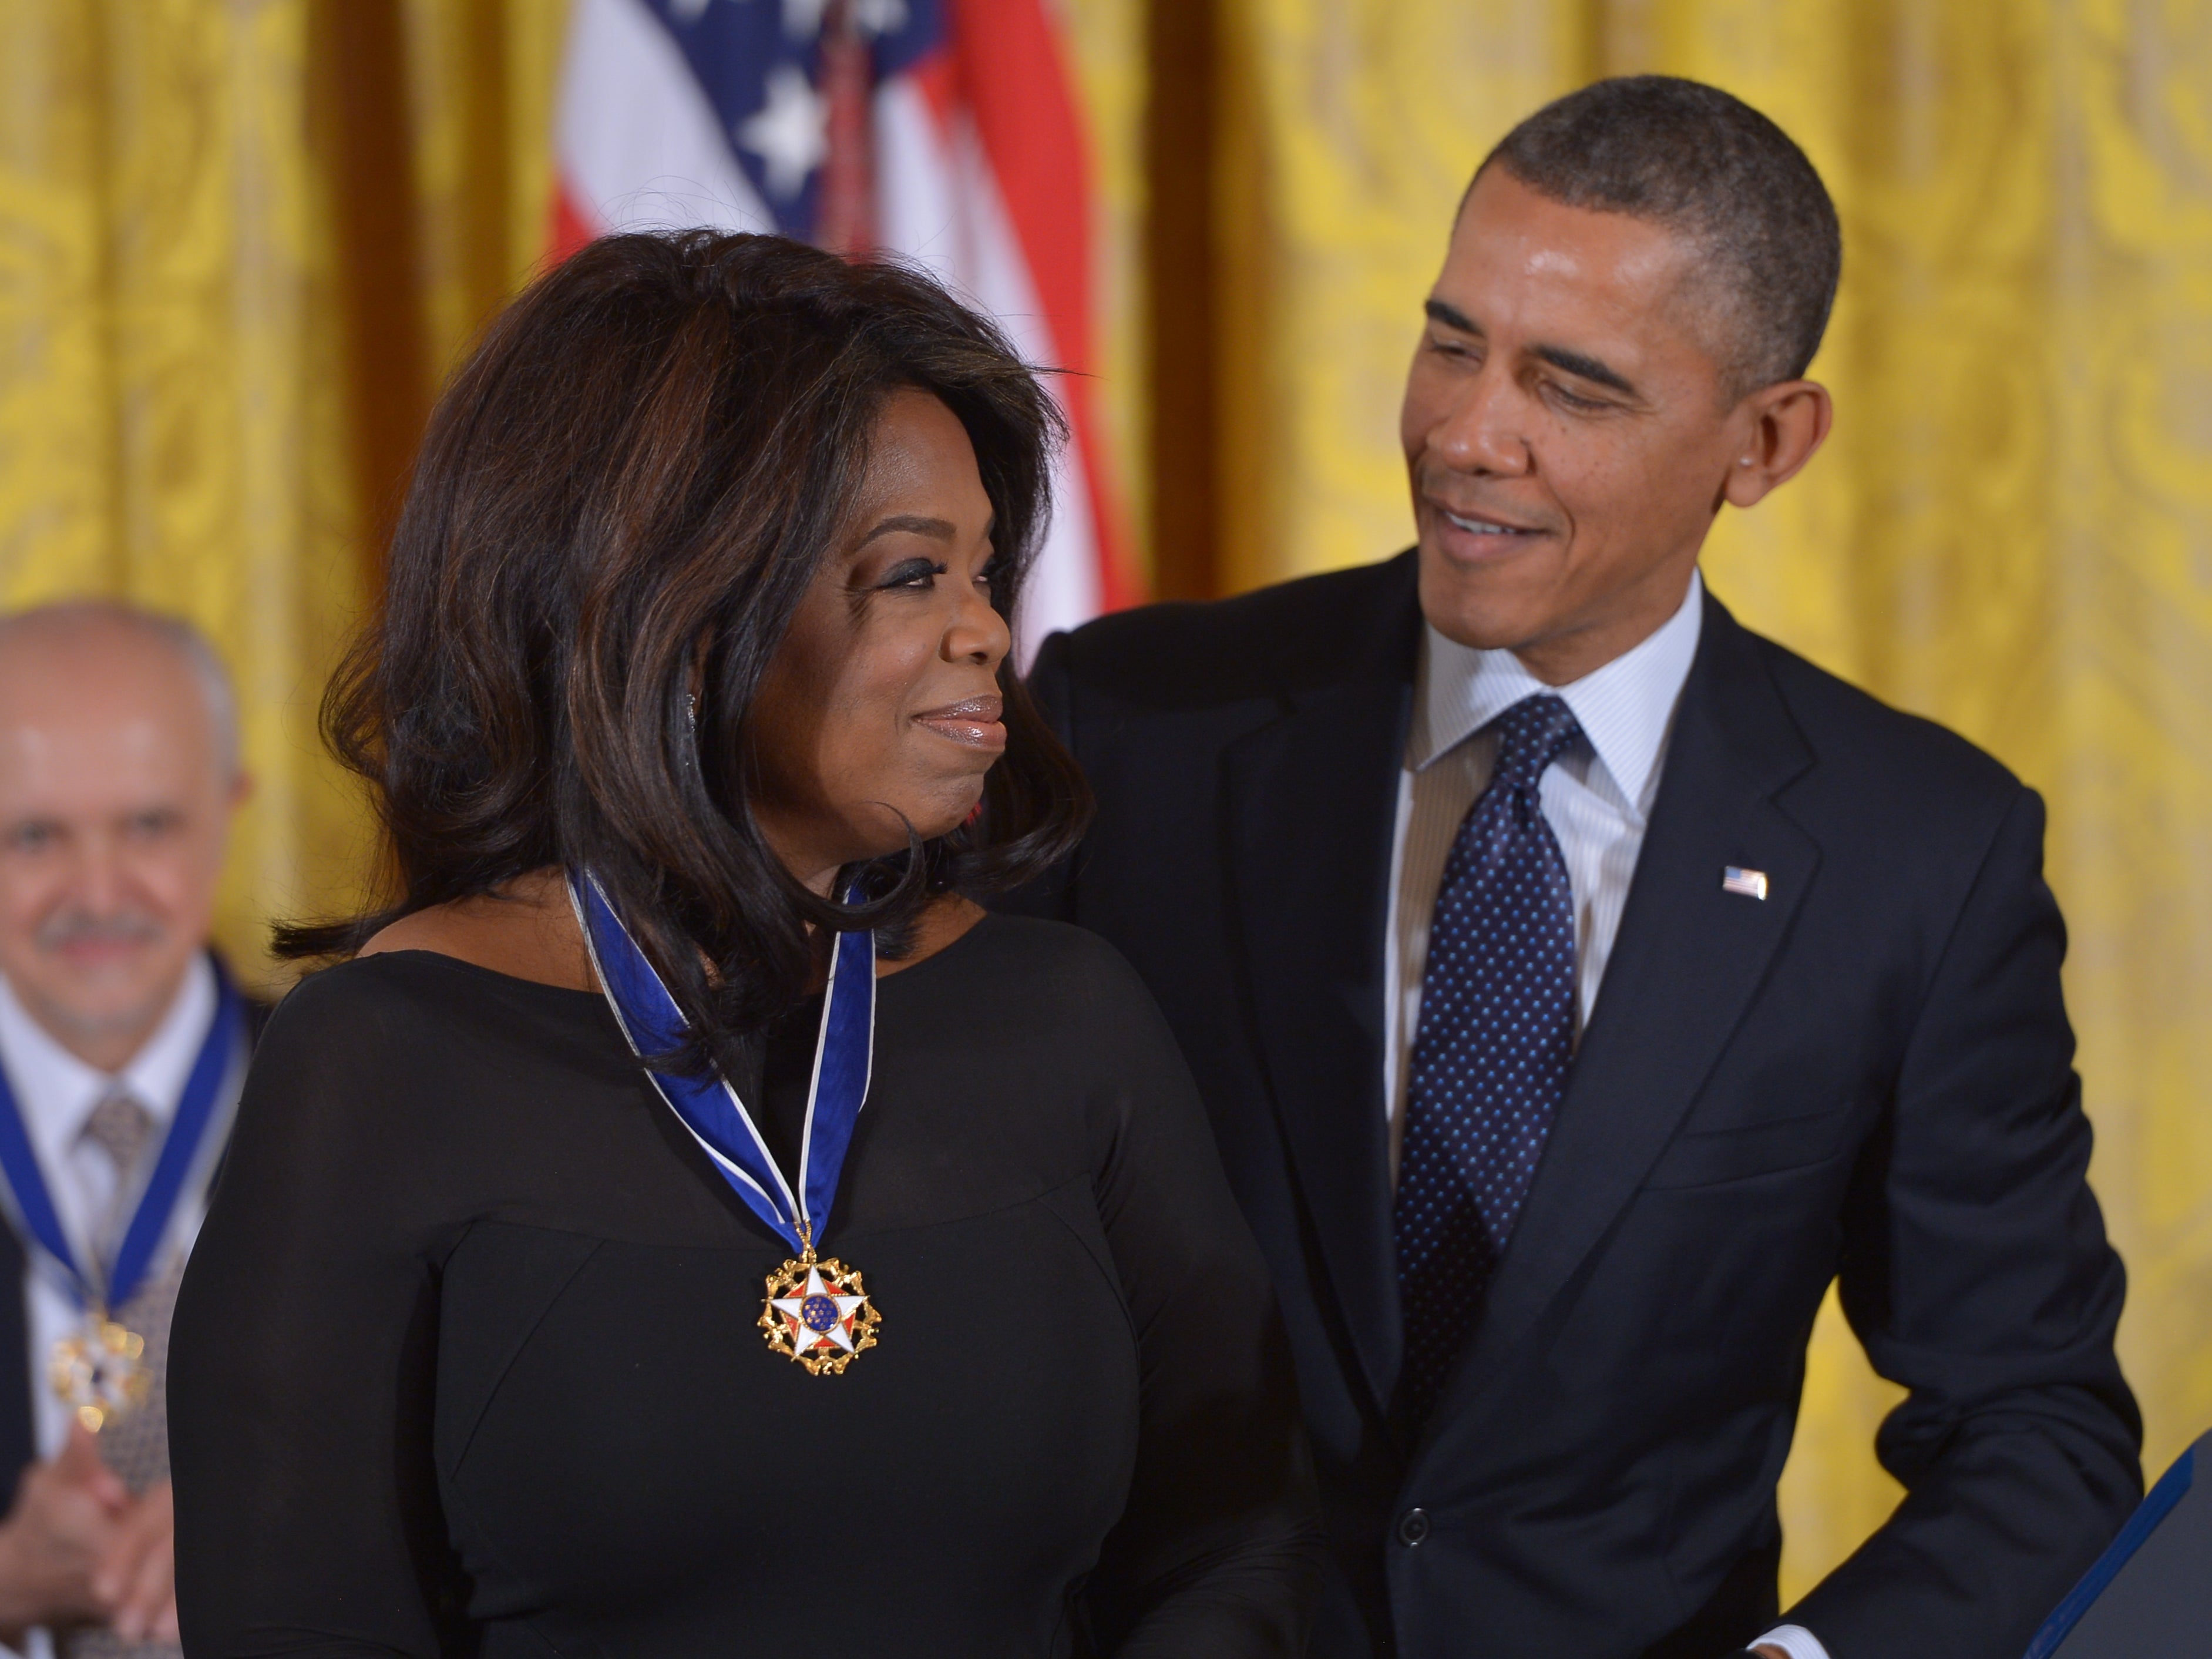 Barack Obama presents the Presidential Medal of Freedom to Oprah Winfrey